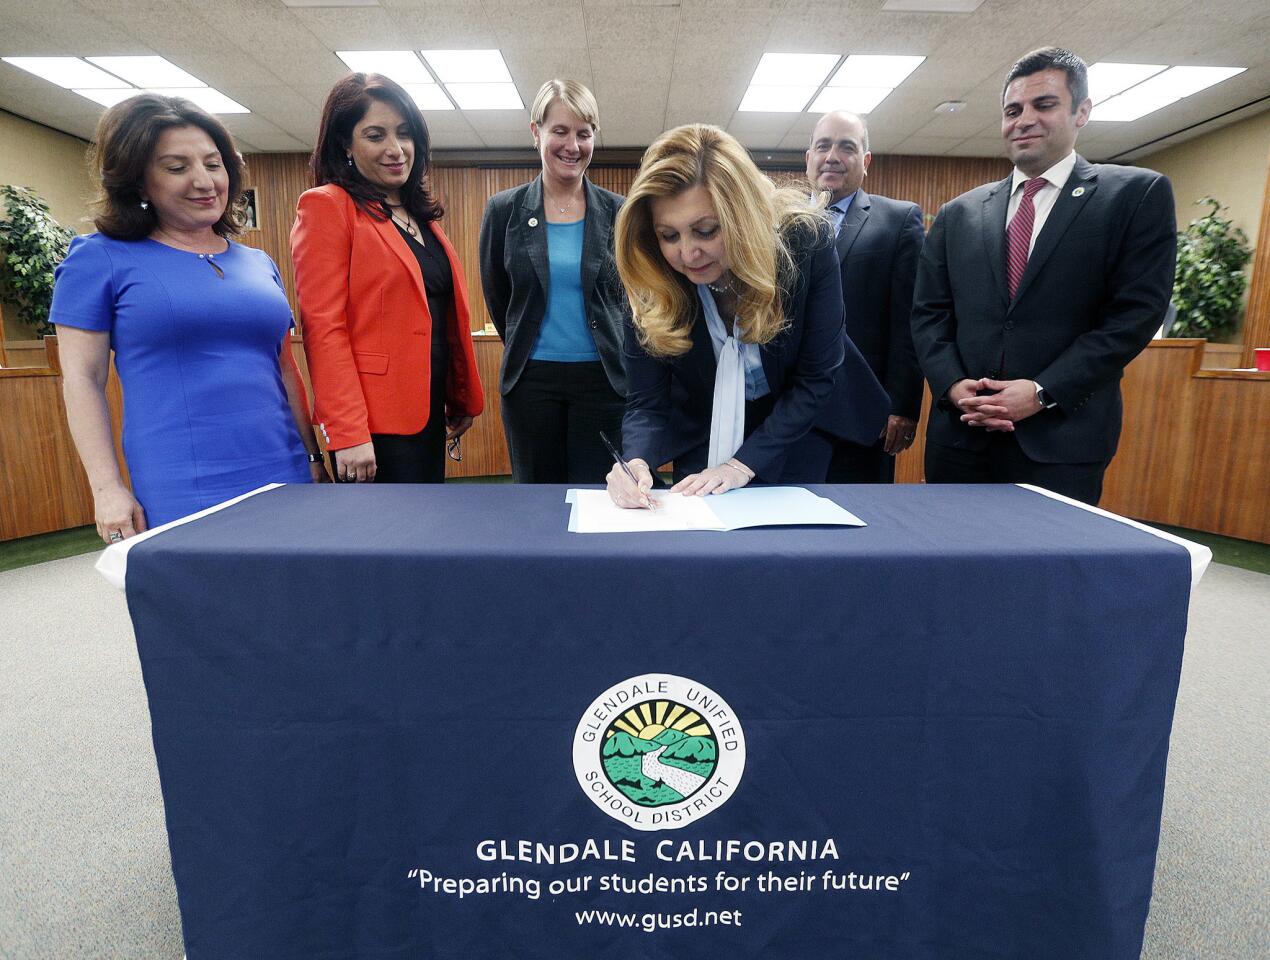 Superintendent Vivian Ekchian signs her contract with the Glendale Unified School Board behind her at the vote and approval of the new Glendale Unified School District Superintendent Vivian Ekchian in the Glendale Unified School District board room in Glendale on Tuesday, May 21, 2019. Ekchian is a Glendale resident and Los Angeles Unified School District Deputy Superintendent.. She will be the first Armenian and first female in school district history and would become the 18th superintendent since 1913.